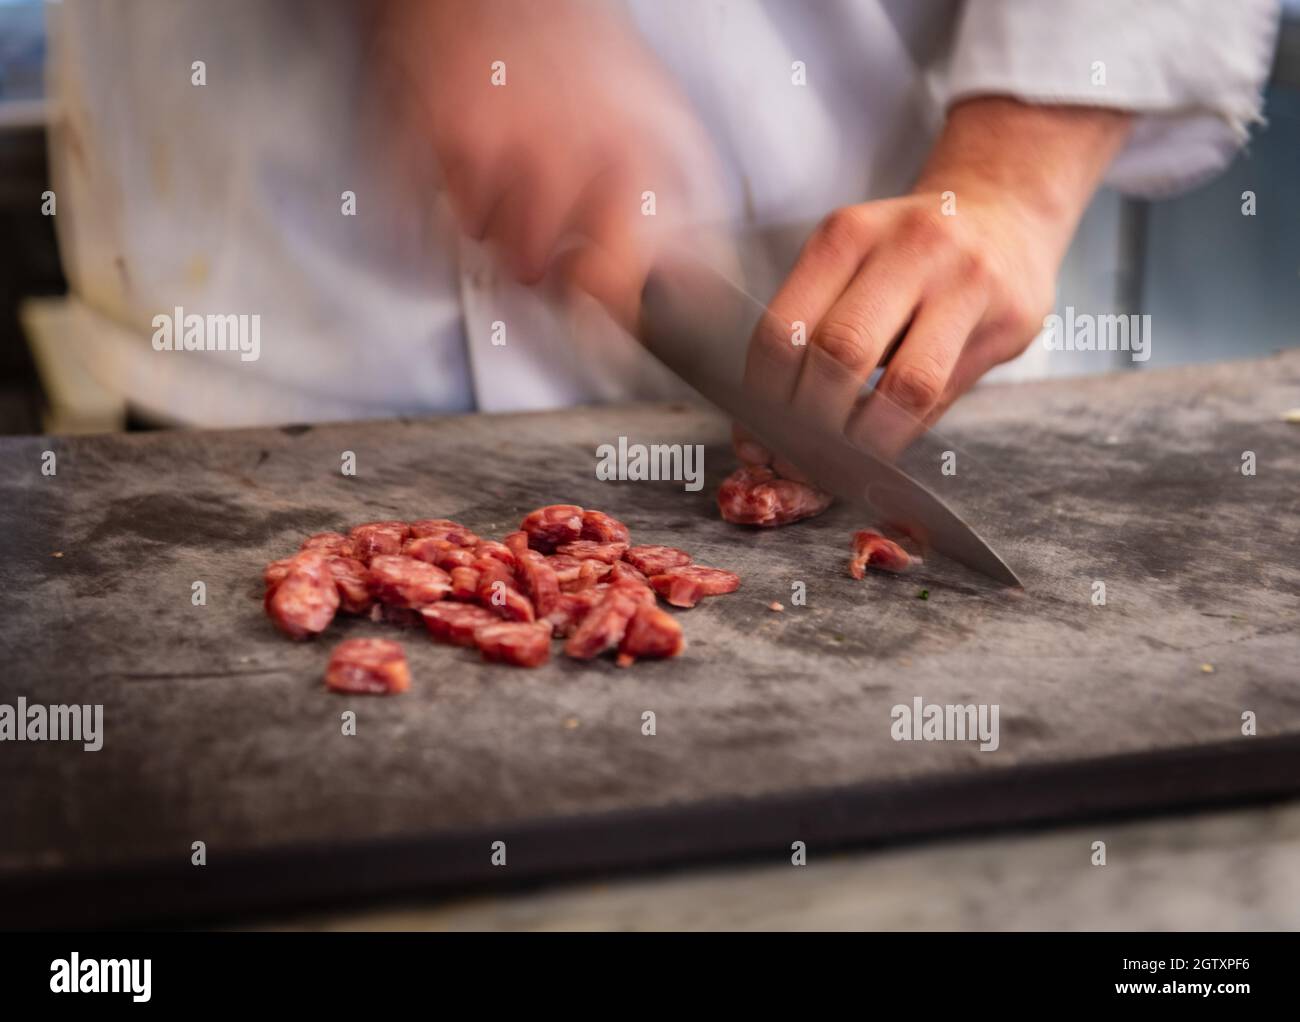 Midsection Of Chef Cutting Meat On Cutting Board Stock Photo